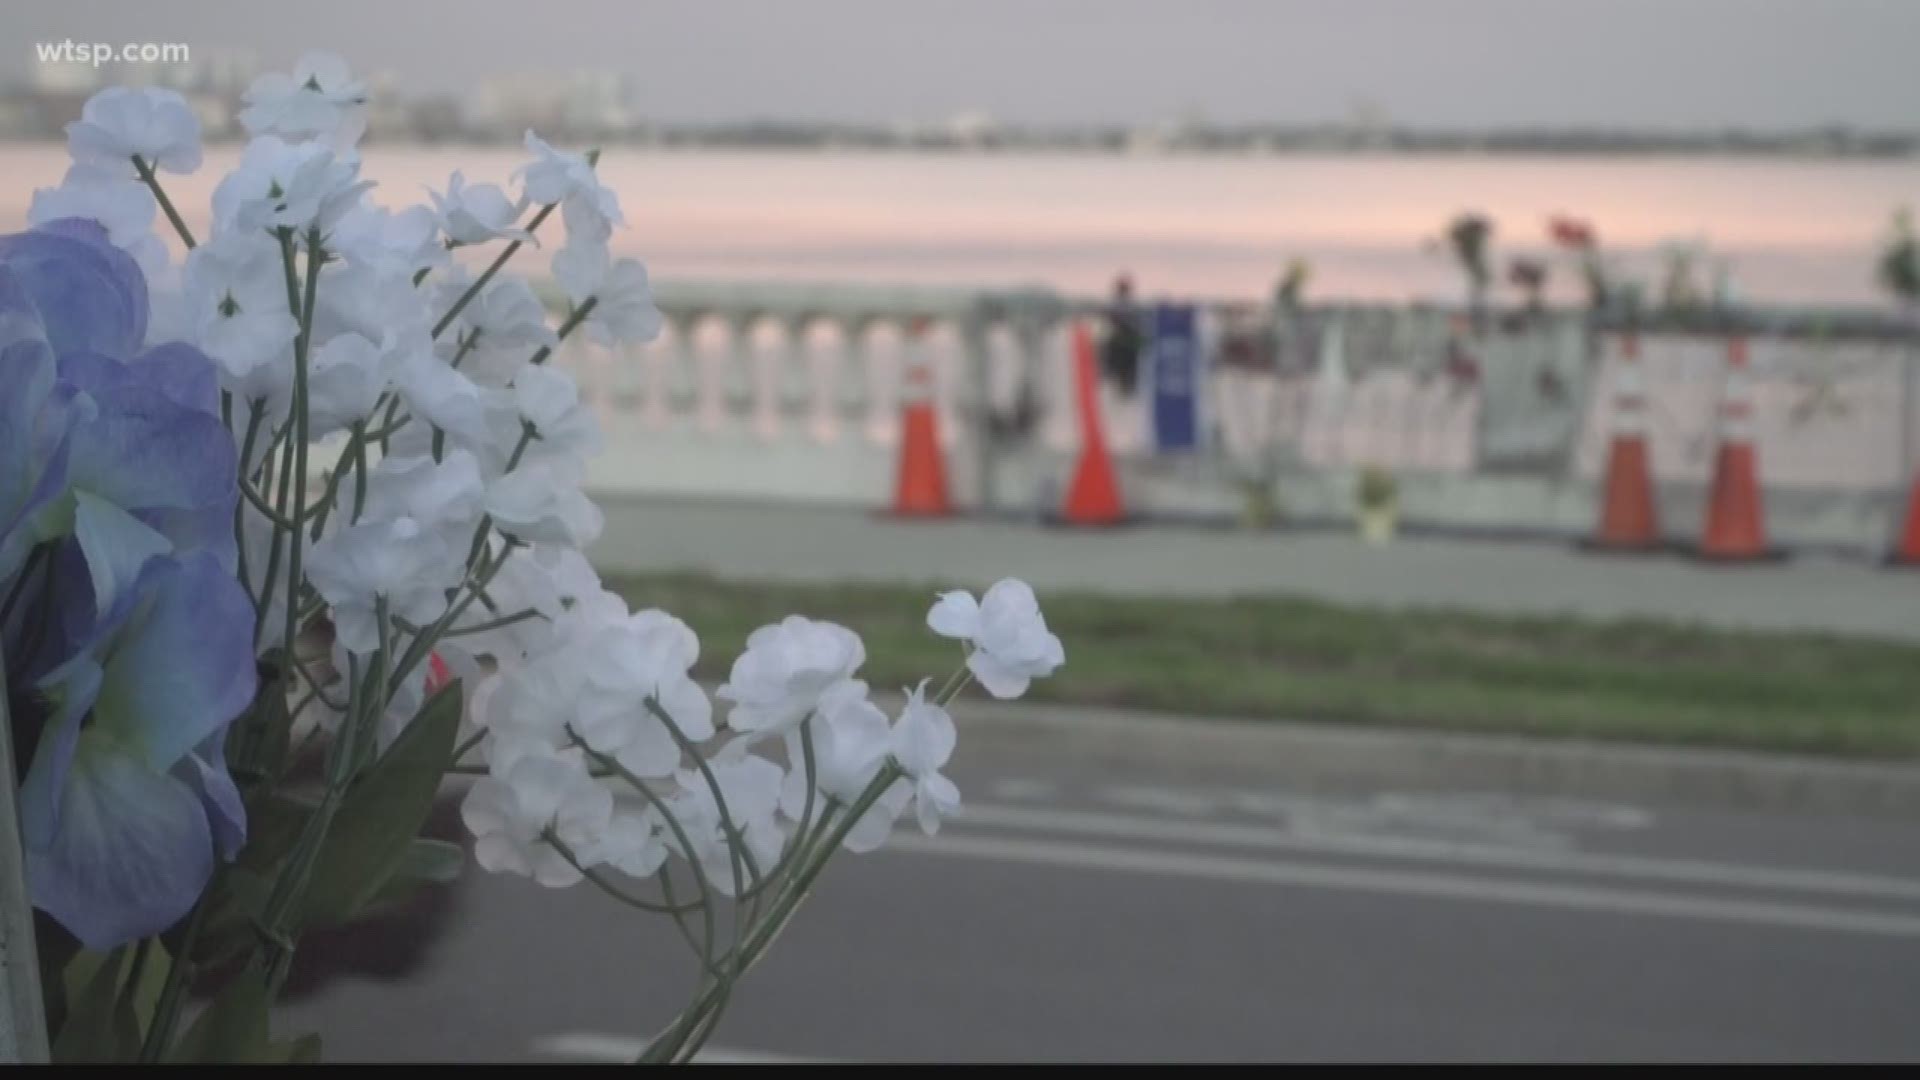 Continued calls for safety improvements along Bayshore Boulevard has led to an interesting solution, but does it have a future?